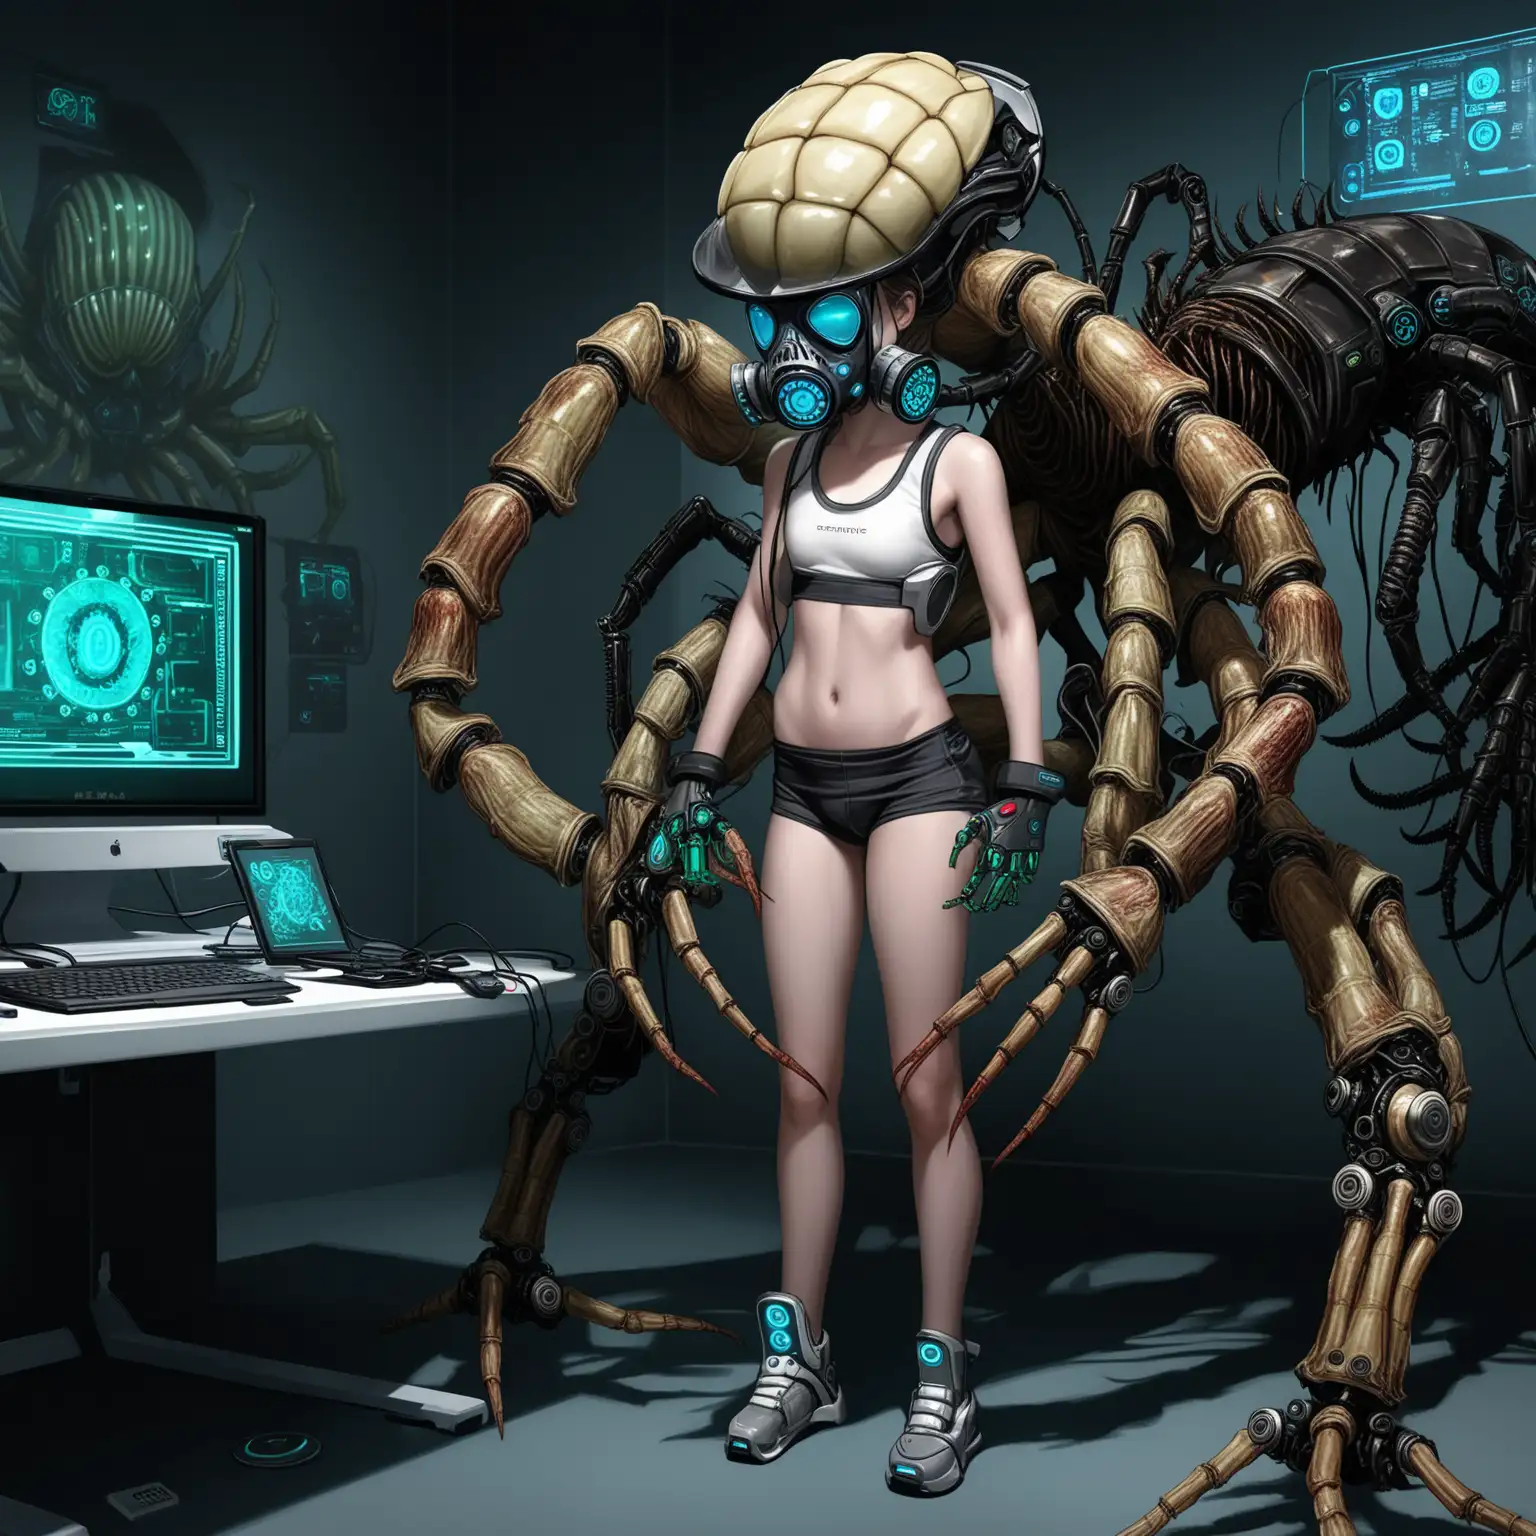 Futuristic Female Athlete Controlled by Computer Virus Robotic Face Hugger Helmet and Machine Heart